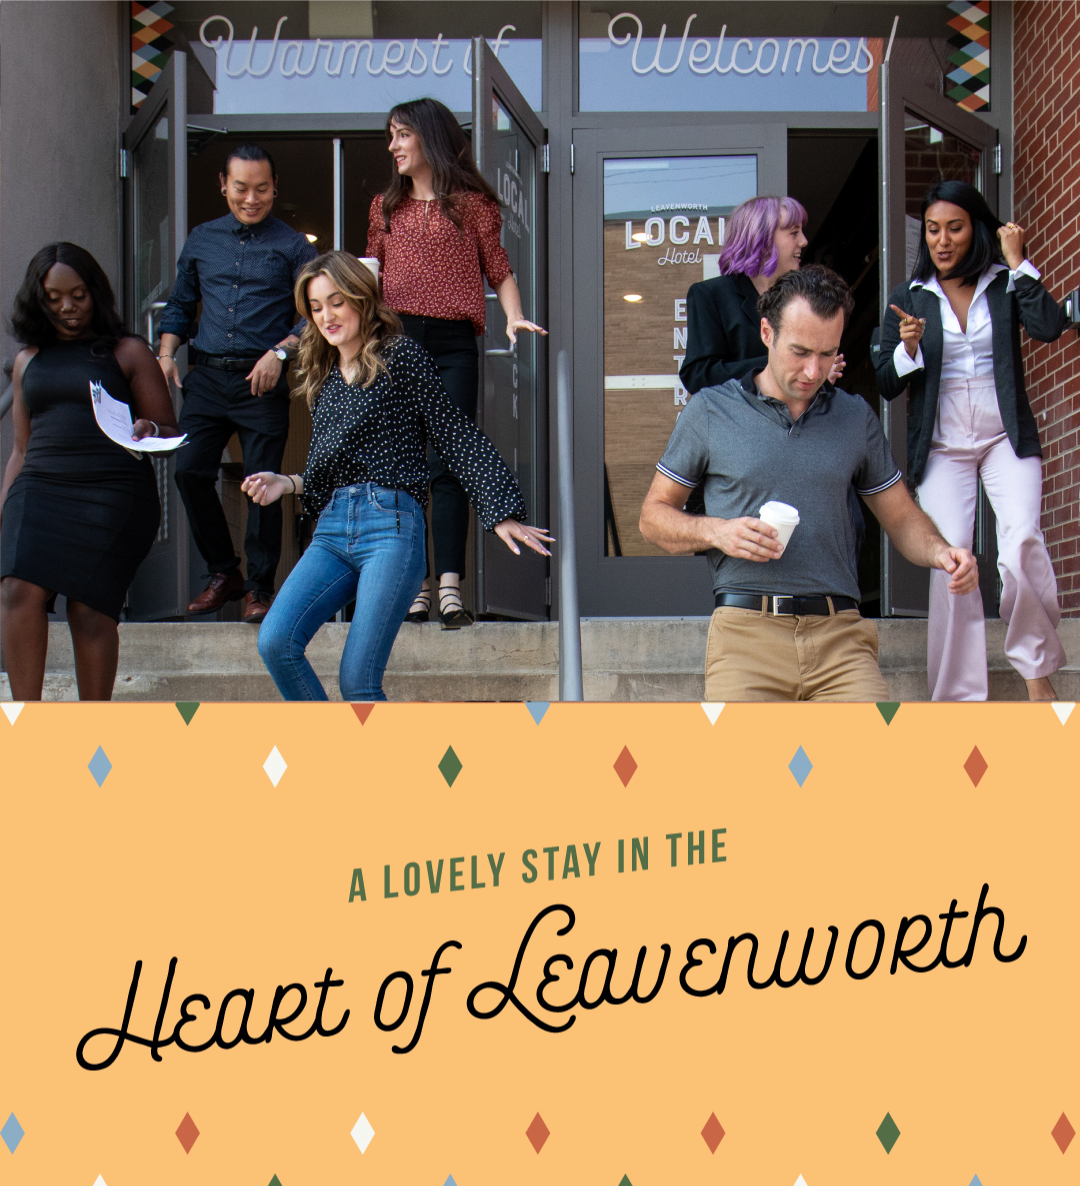 A lovely stay in the heart of Leavenworth